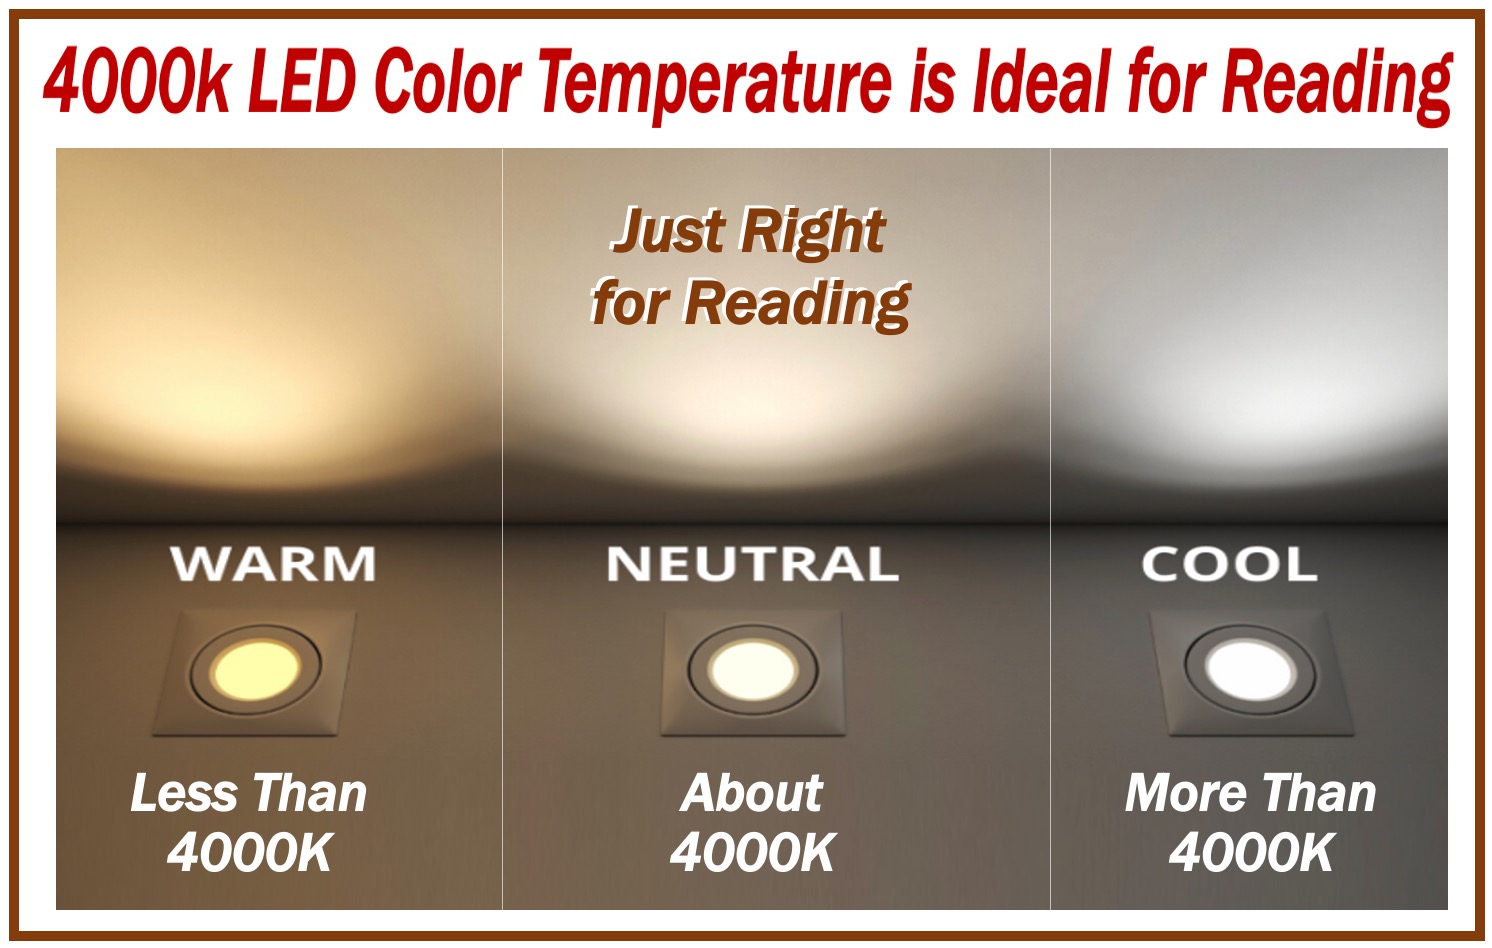 4000k LED Color Temperature Ideal for Reading